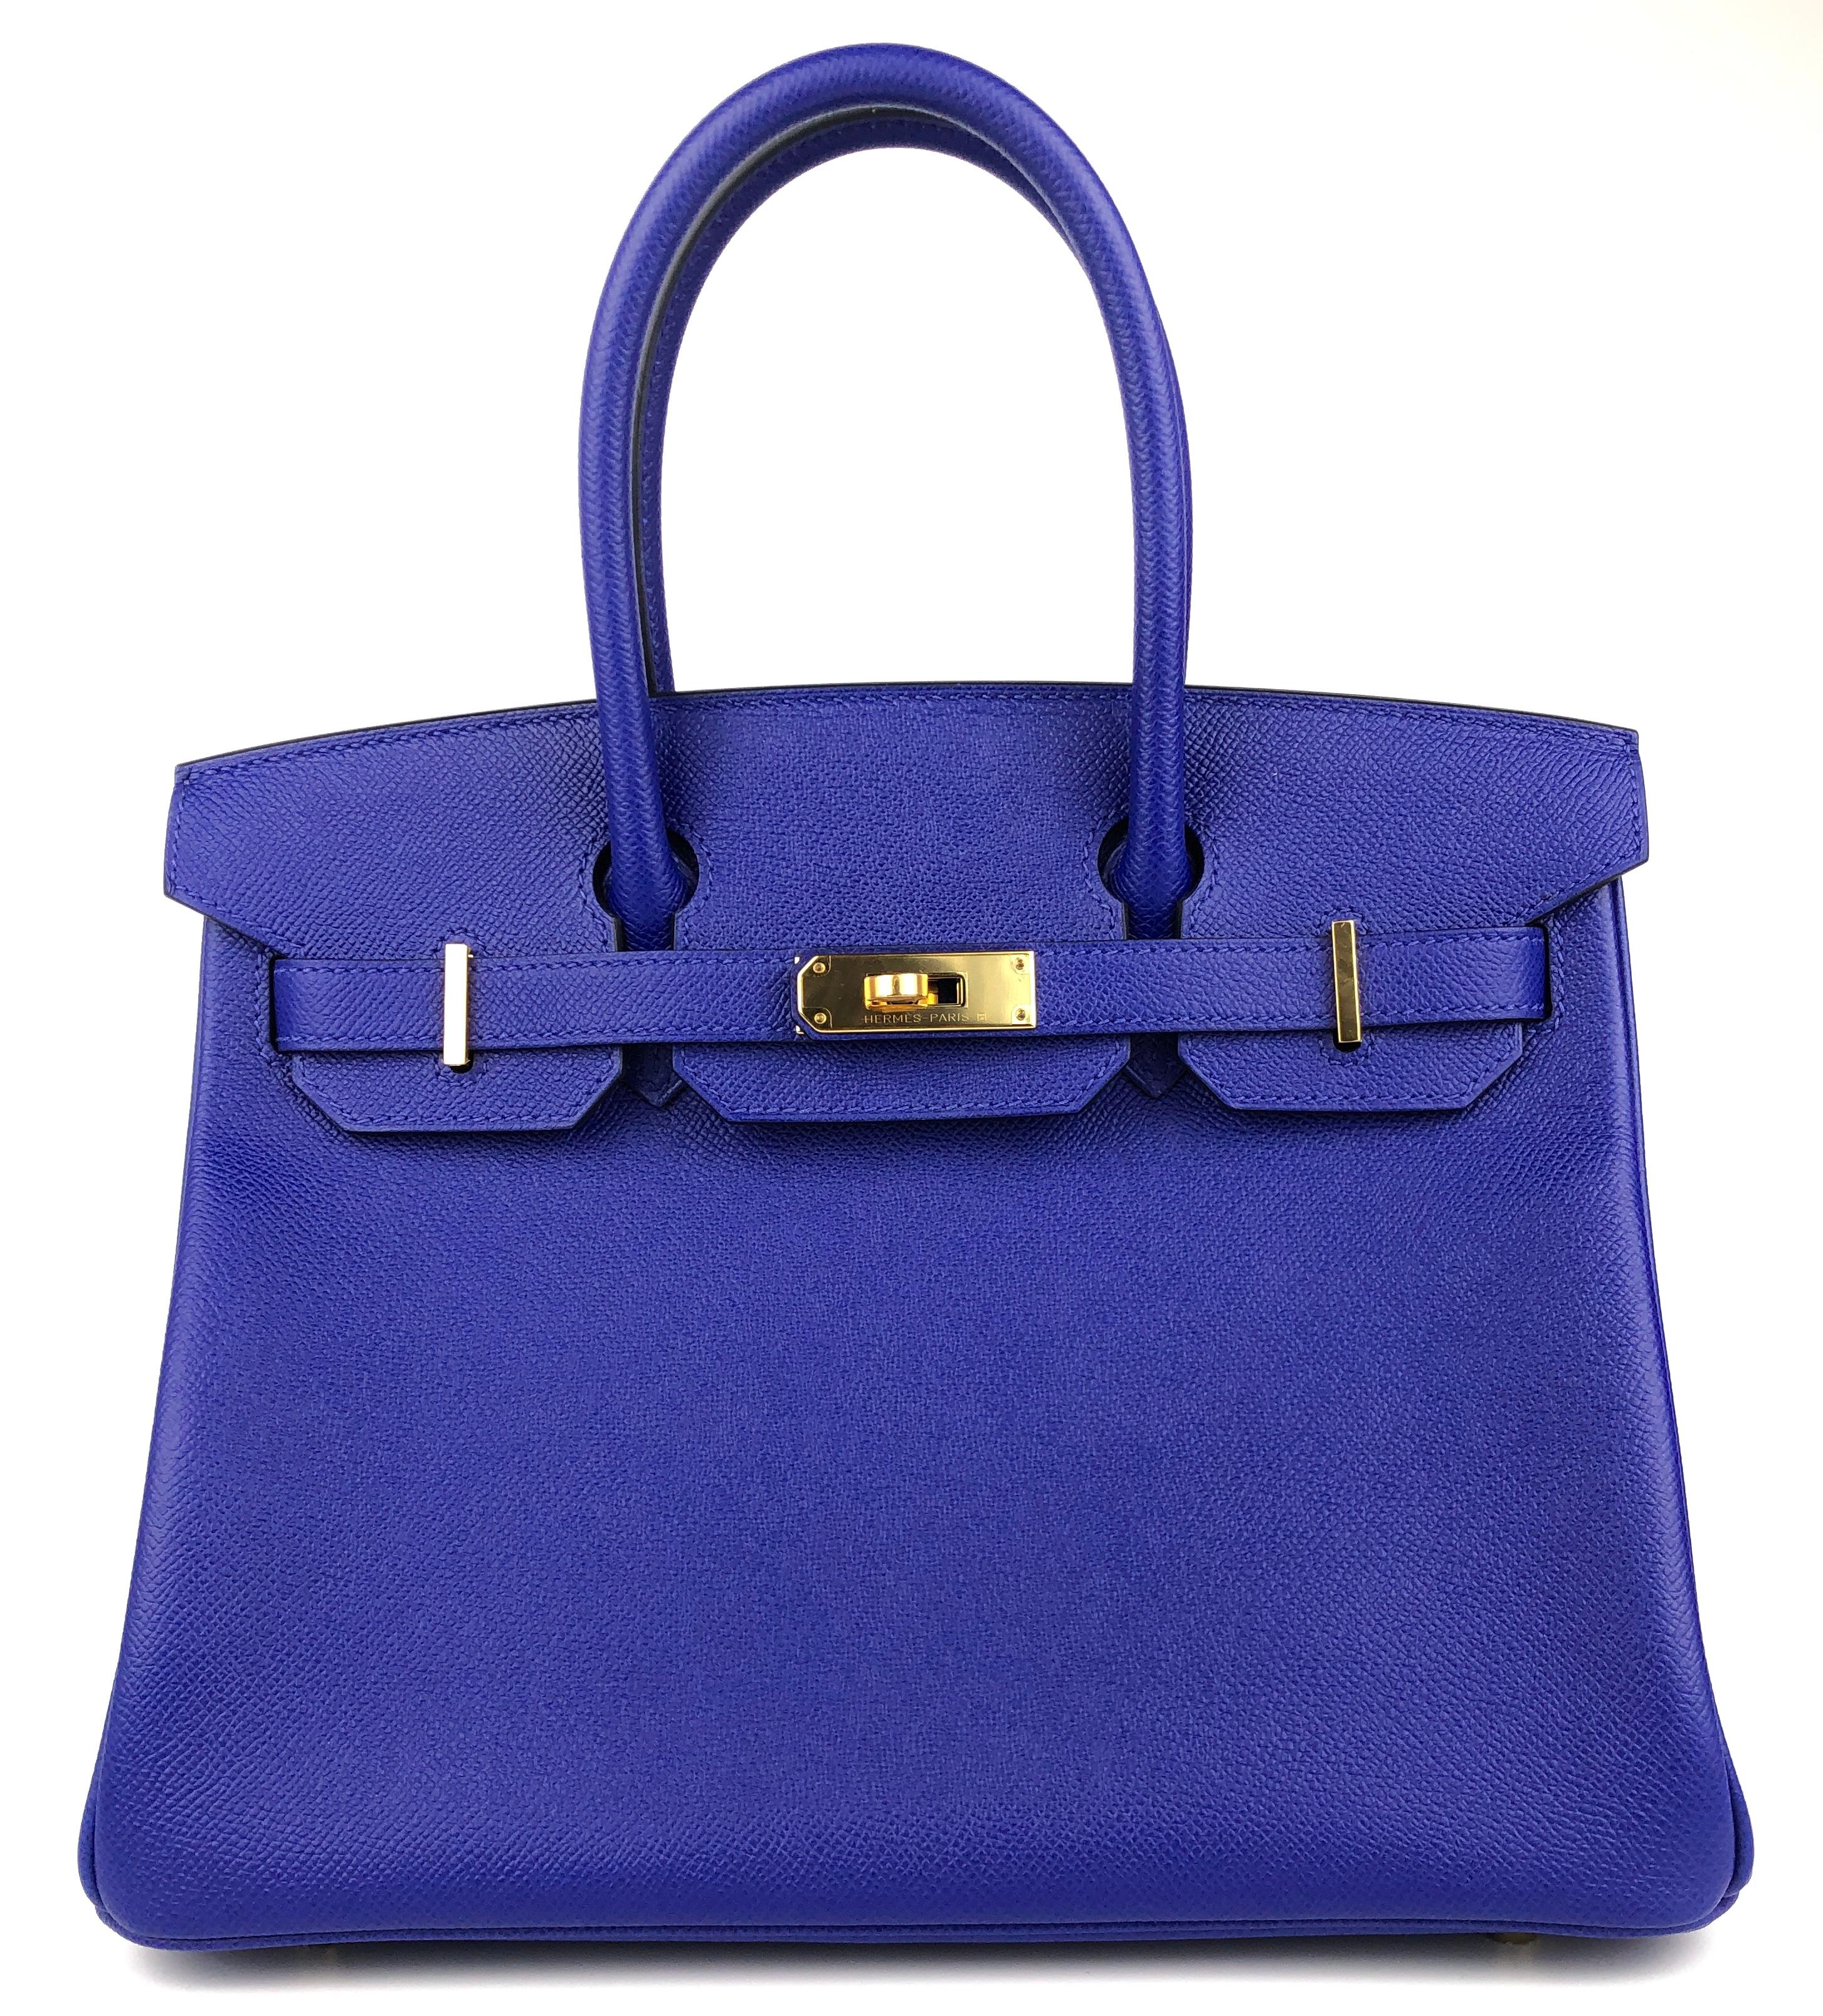 Rare AS NEW 2018 Hermes Birkin 30 Blue Electric Epsom Leather Gold Hardware . C Stamp 2018. From a collectors closet. The bag has been handled and displayed but never worn outside. 

May have Slight marks on bottom interior due to lock being stored